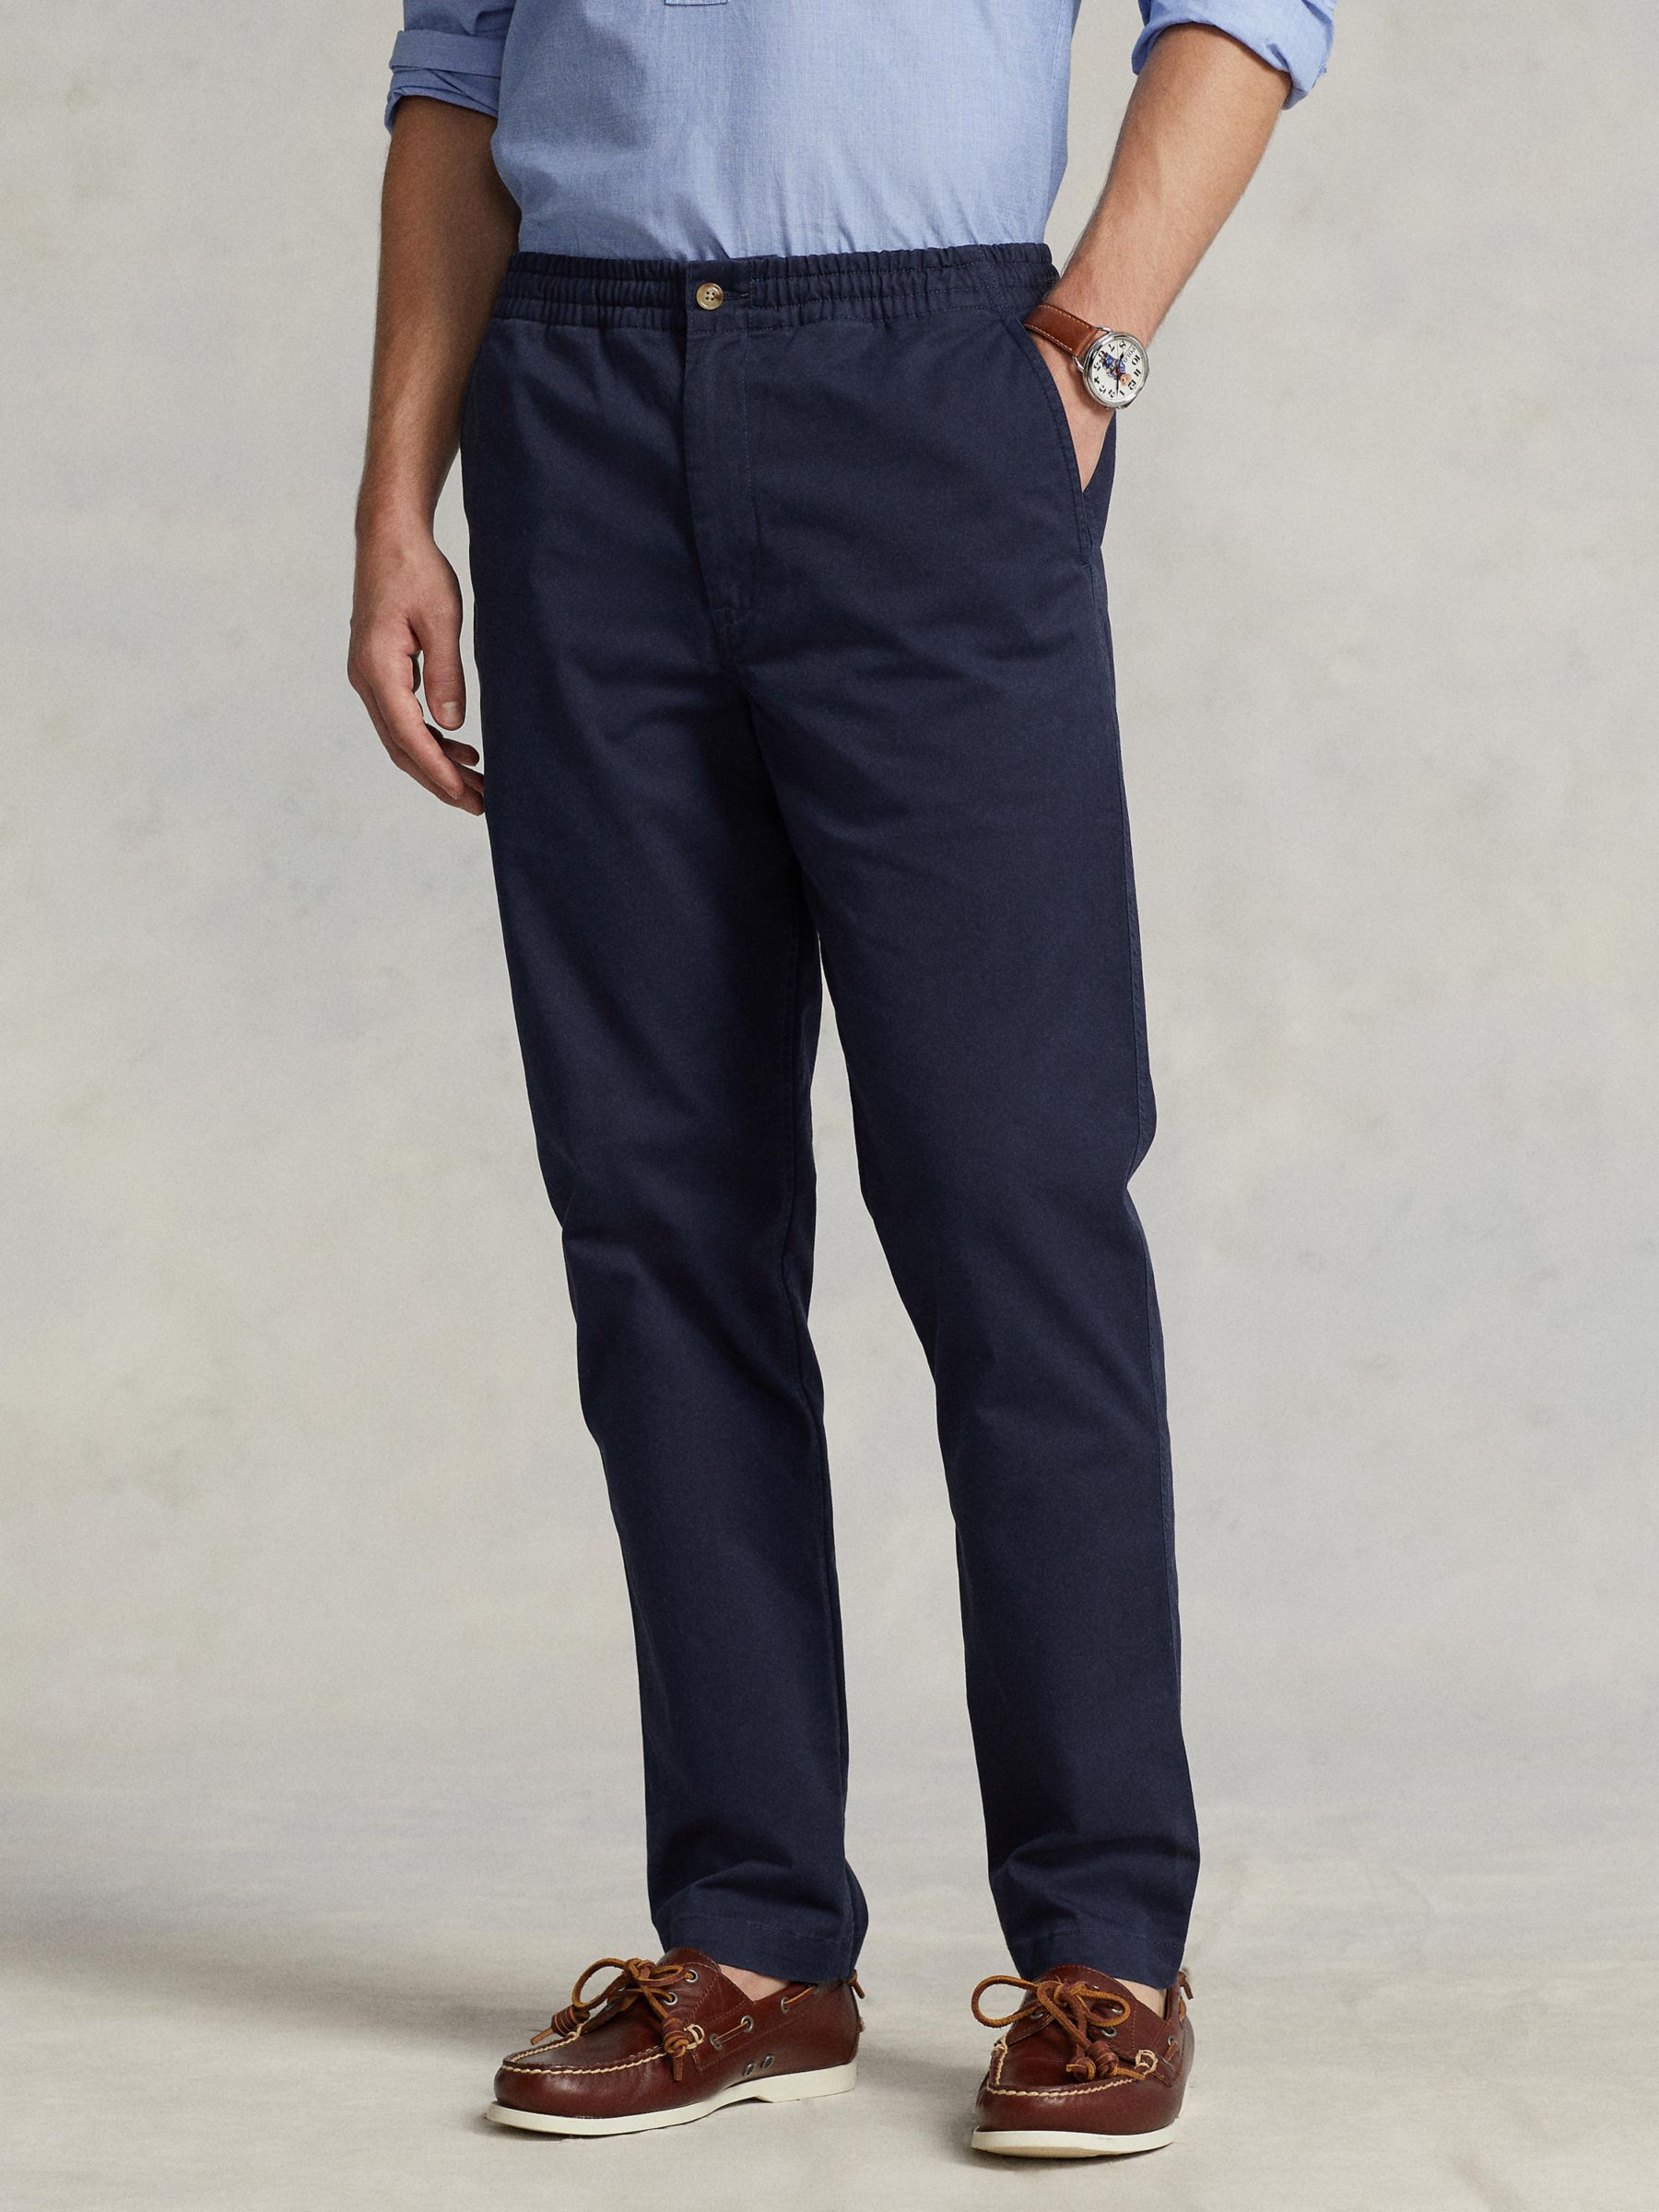 Polo Ralph Lauren Prepster Classic Fit Chino Trousers, Navy, M